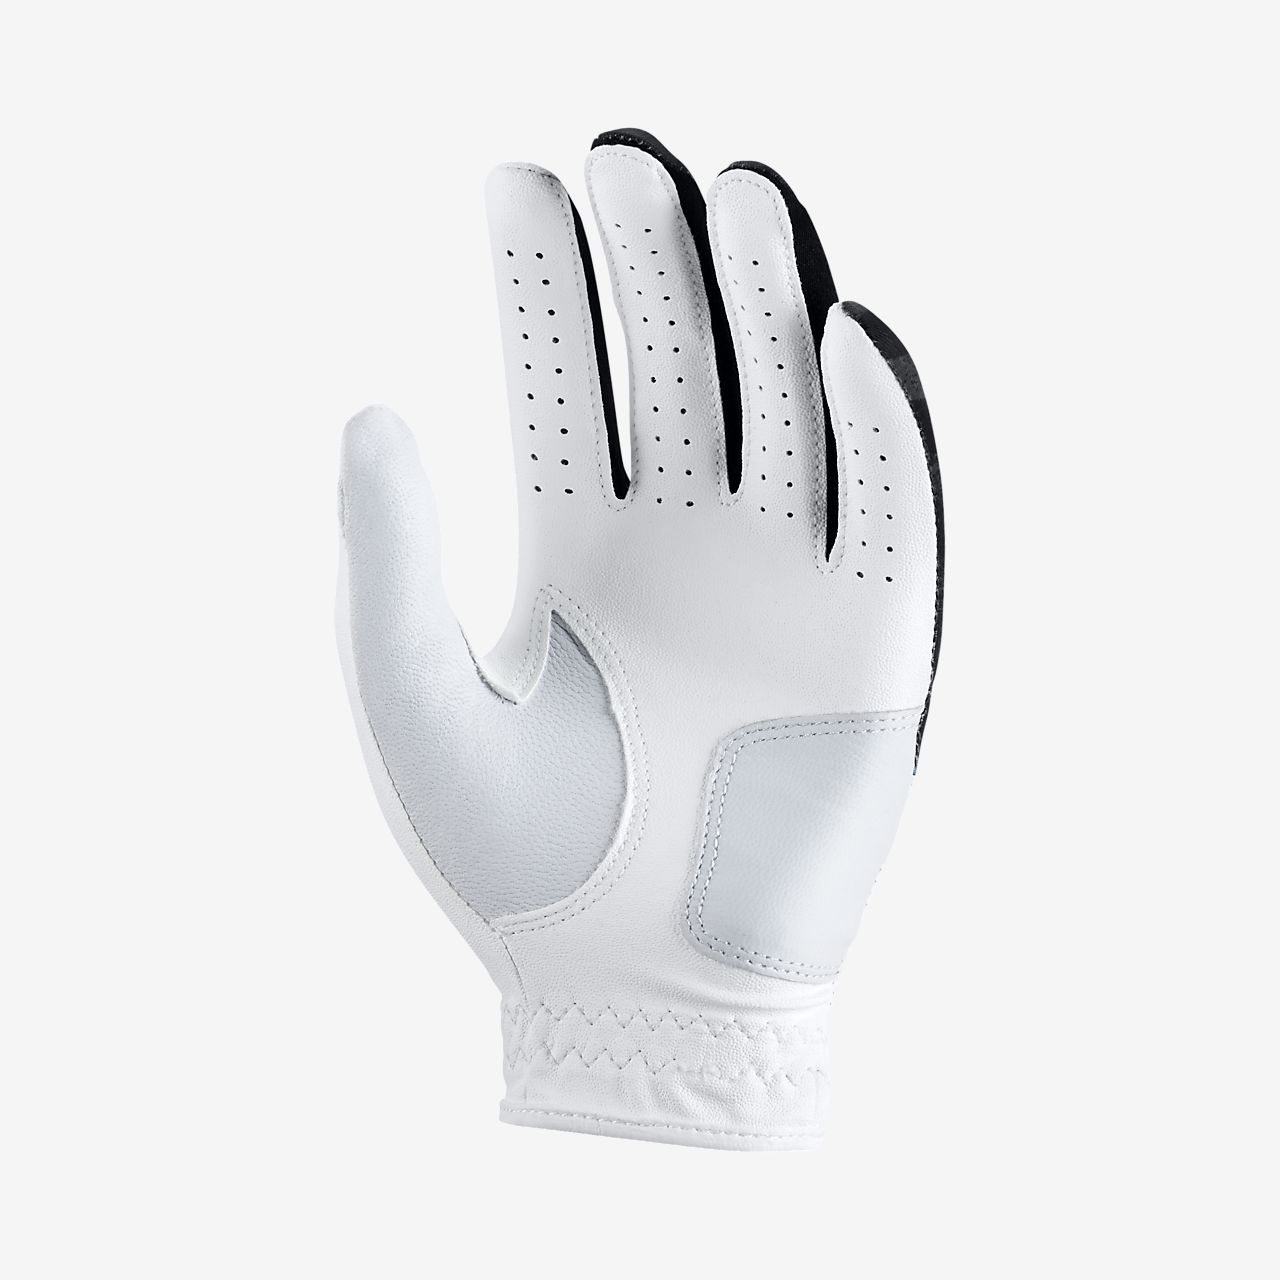 Nike Glove Size Chart - Images Gloves and Descriptions Nightuplife.Com